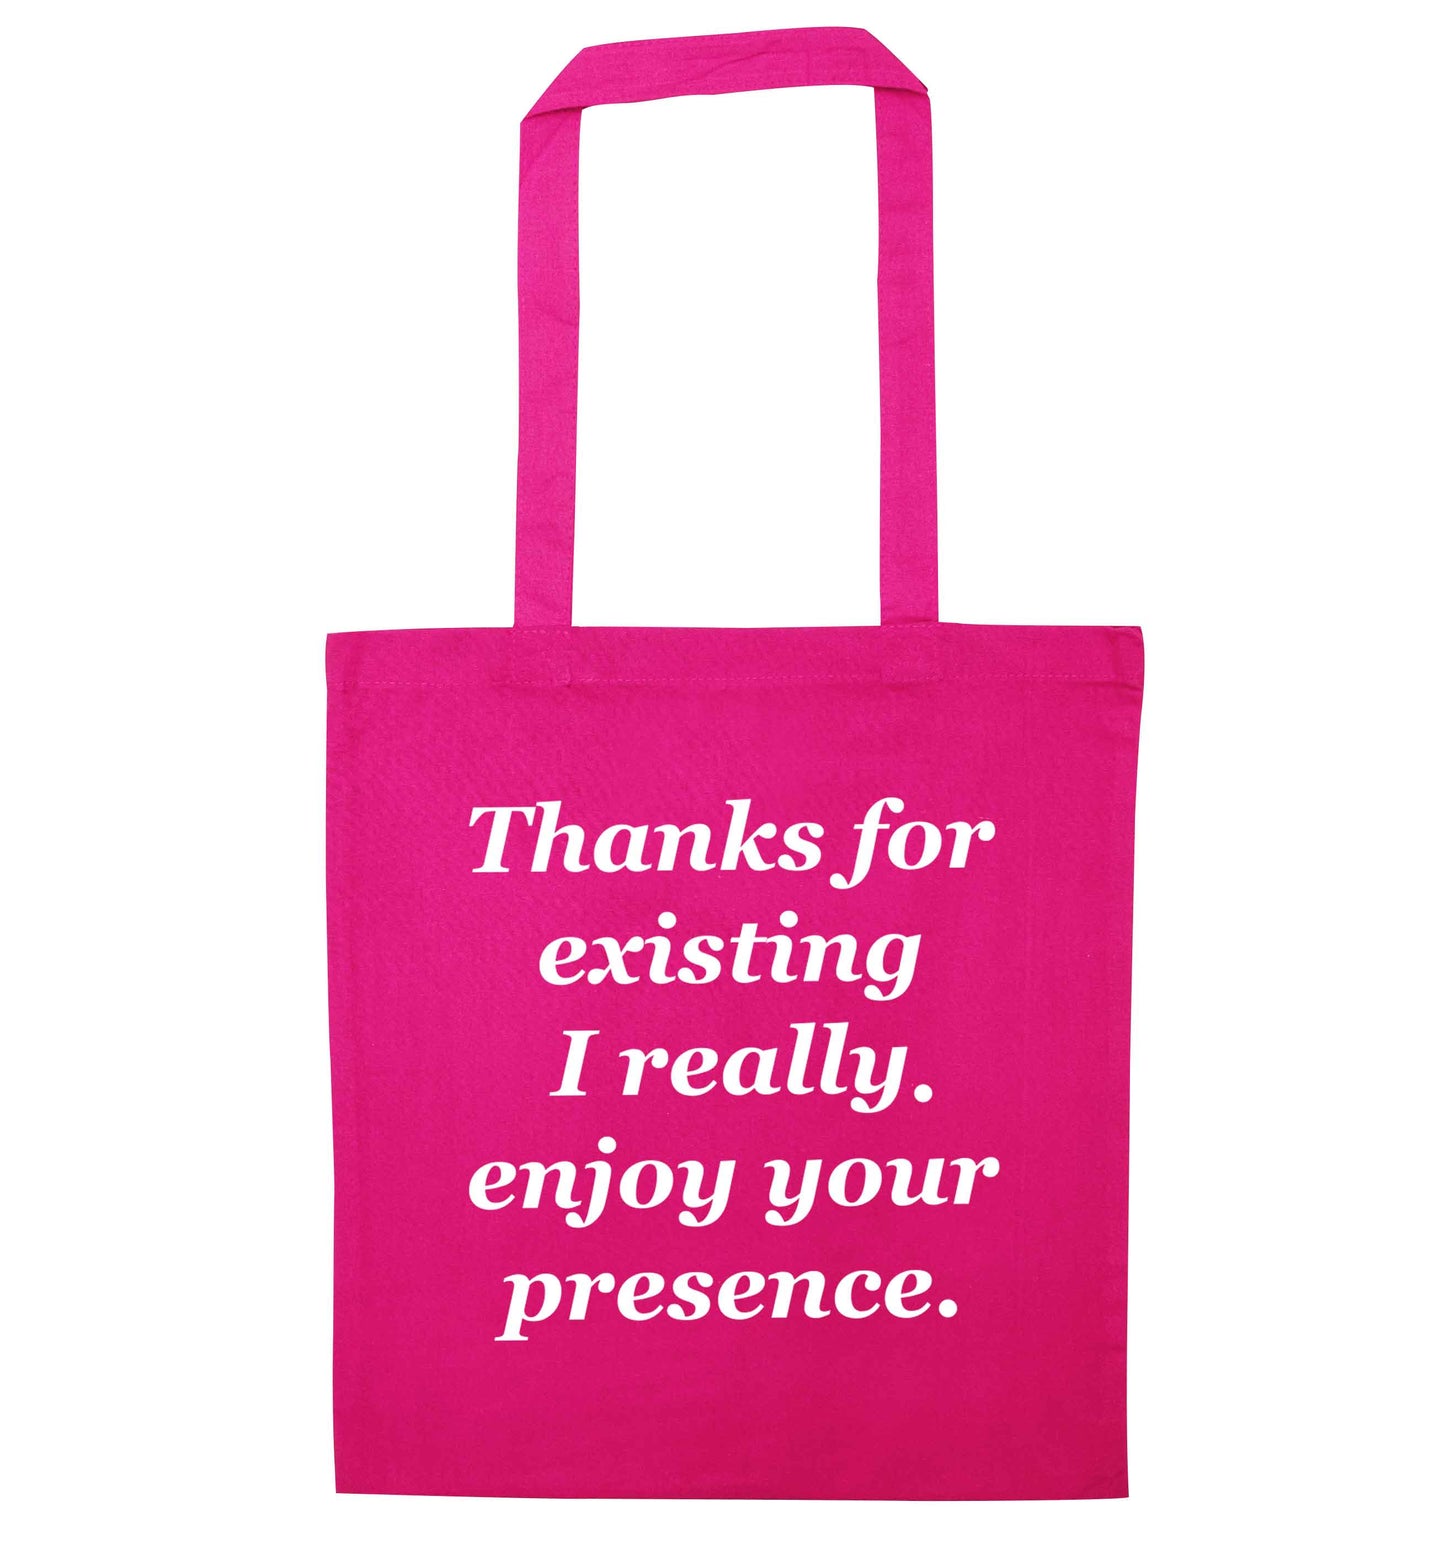 Thanks for existing I really enjoy your presence pink tote bag